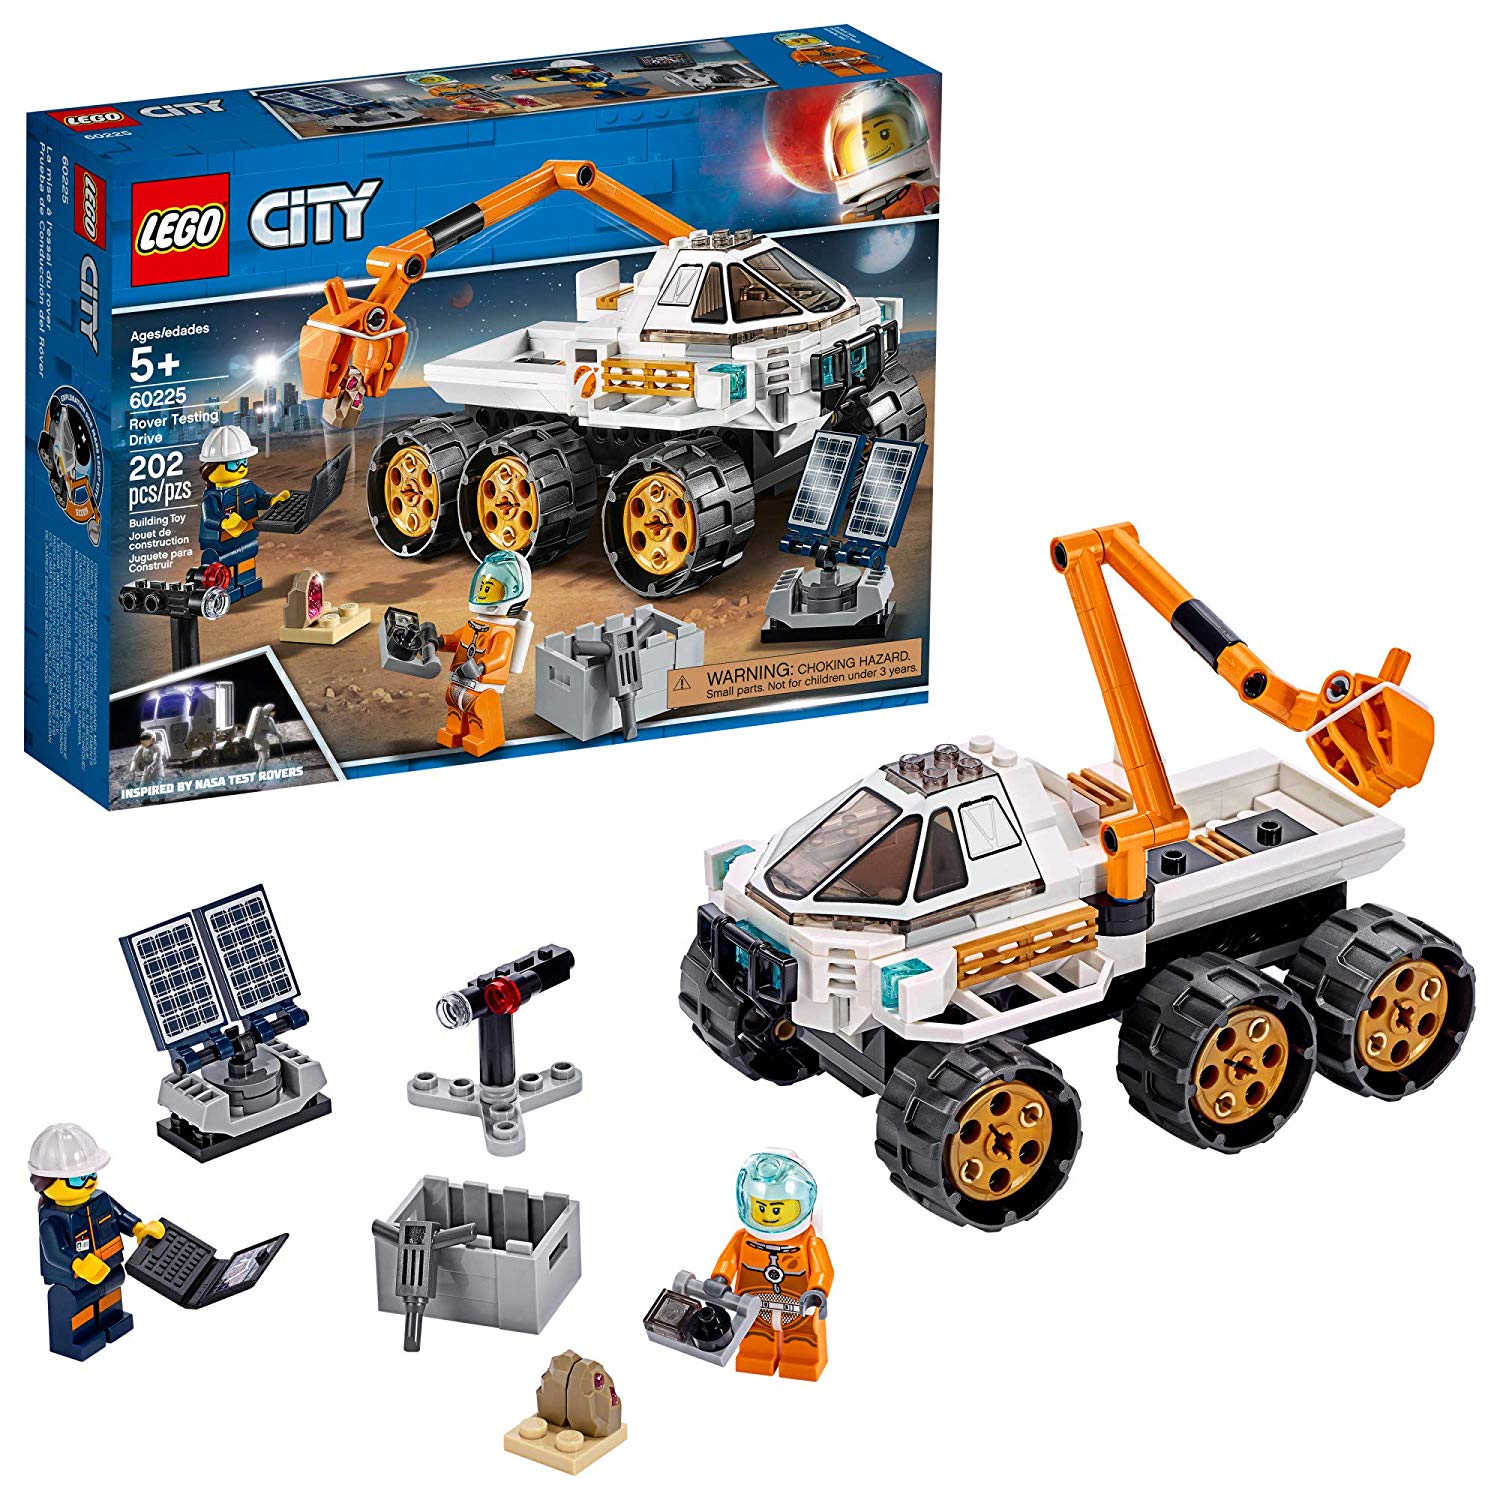 Lego City Space 60225 Mars Rover Research Vehicle (202 Pieces)